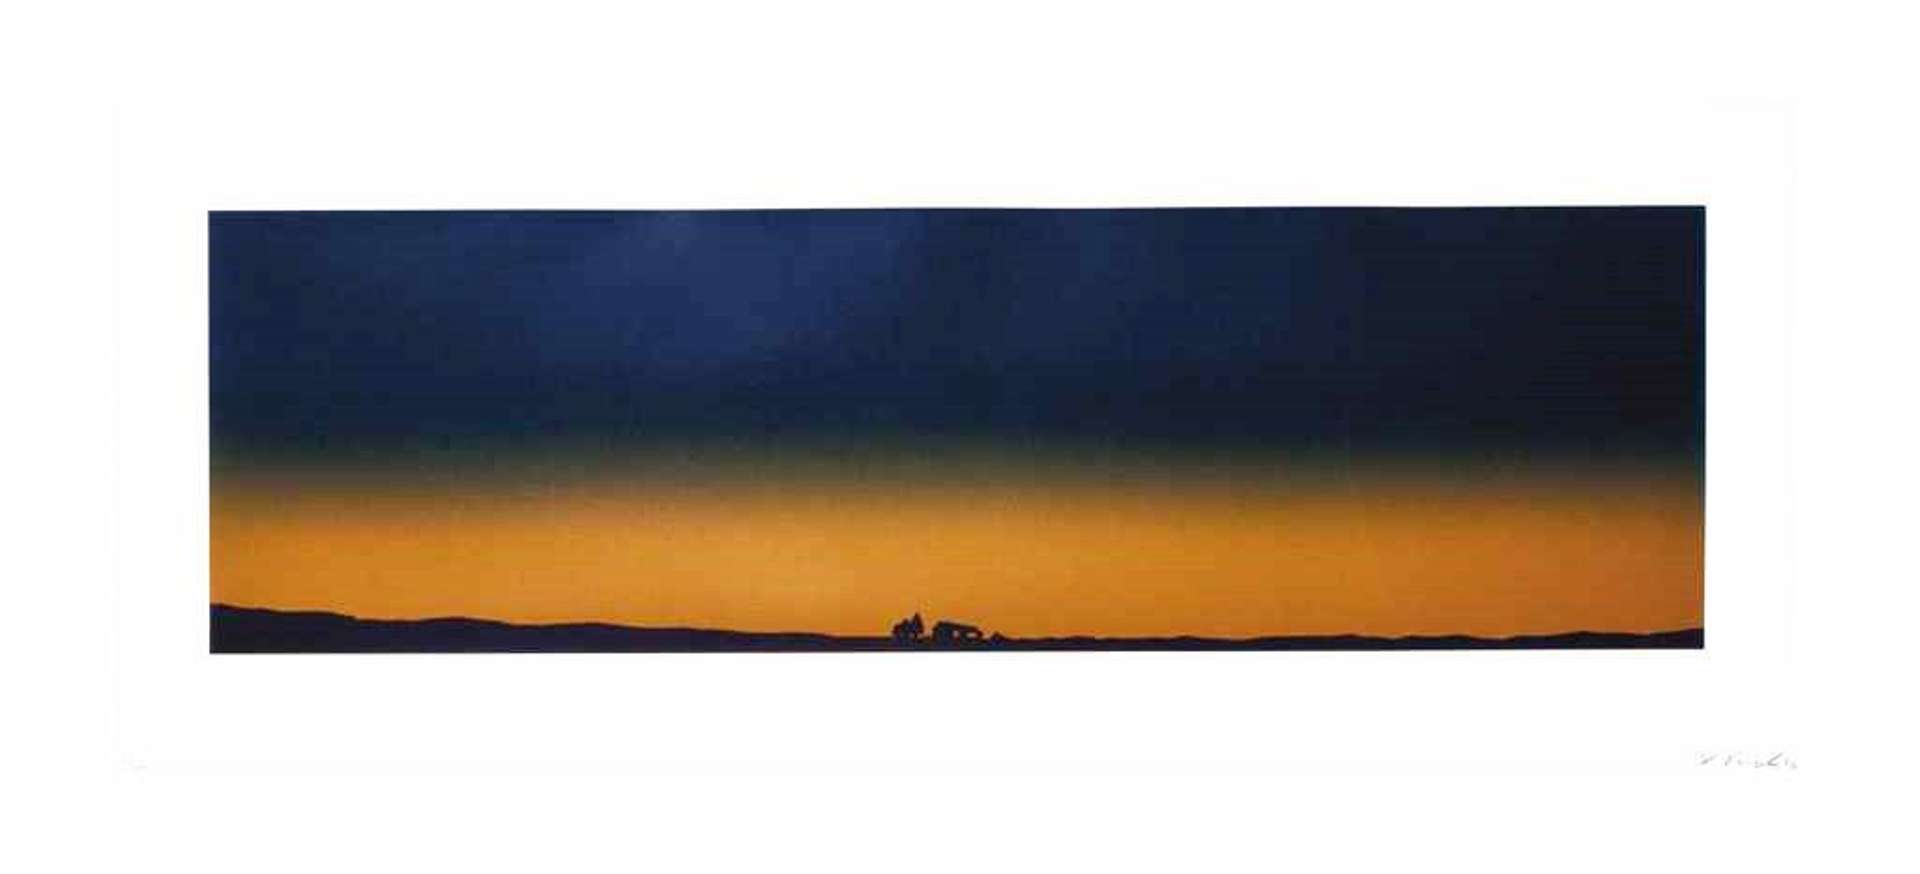 Ed Ruscha: Home With Complete Electronic Security System - Signed Print